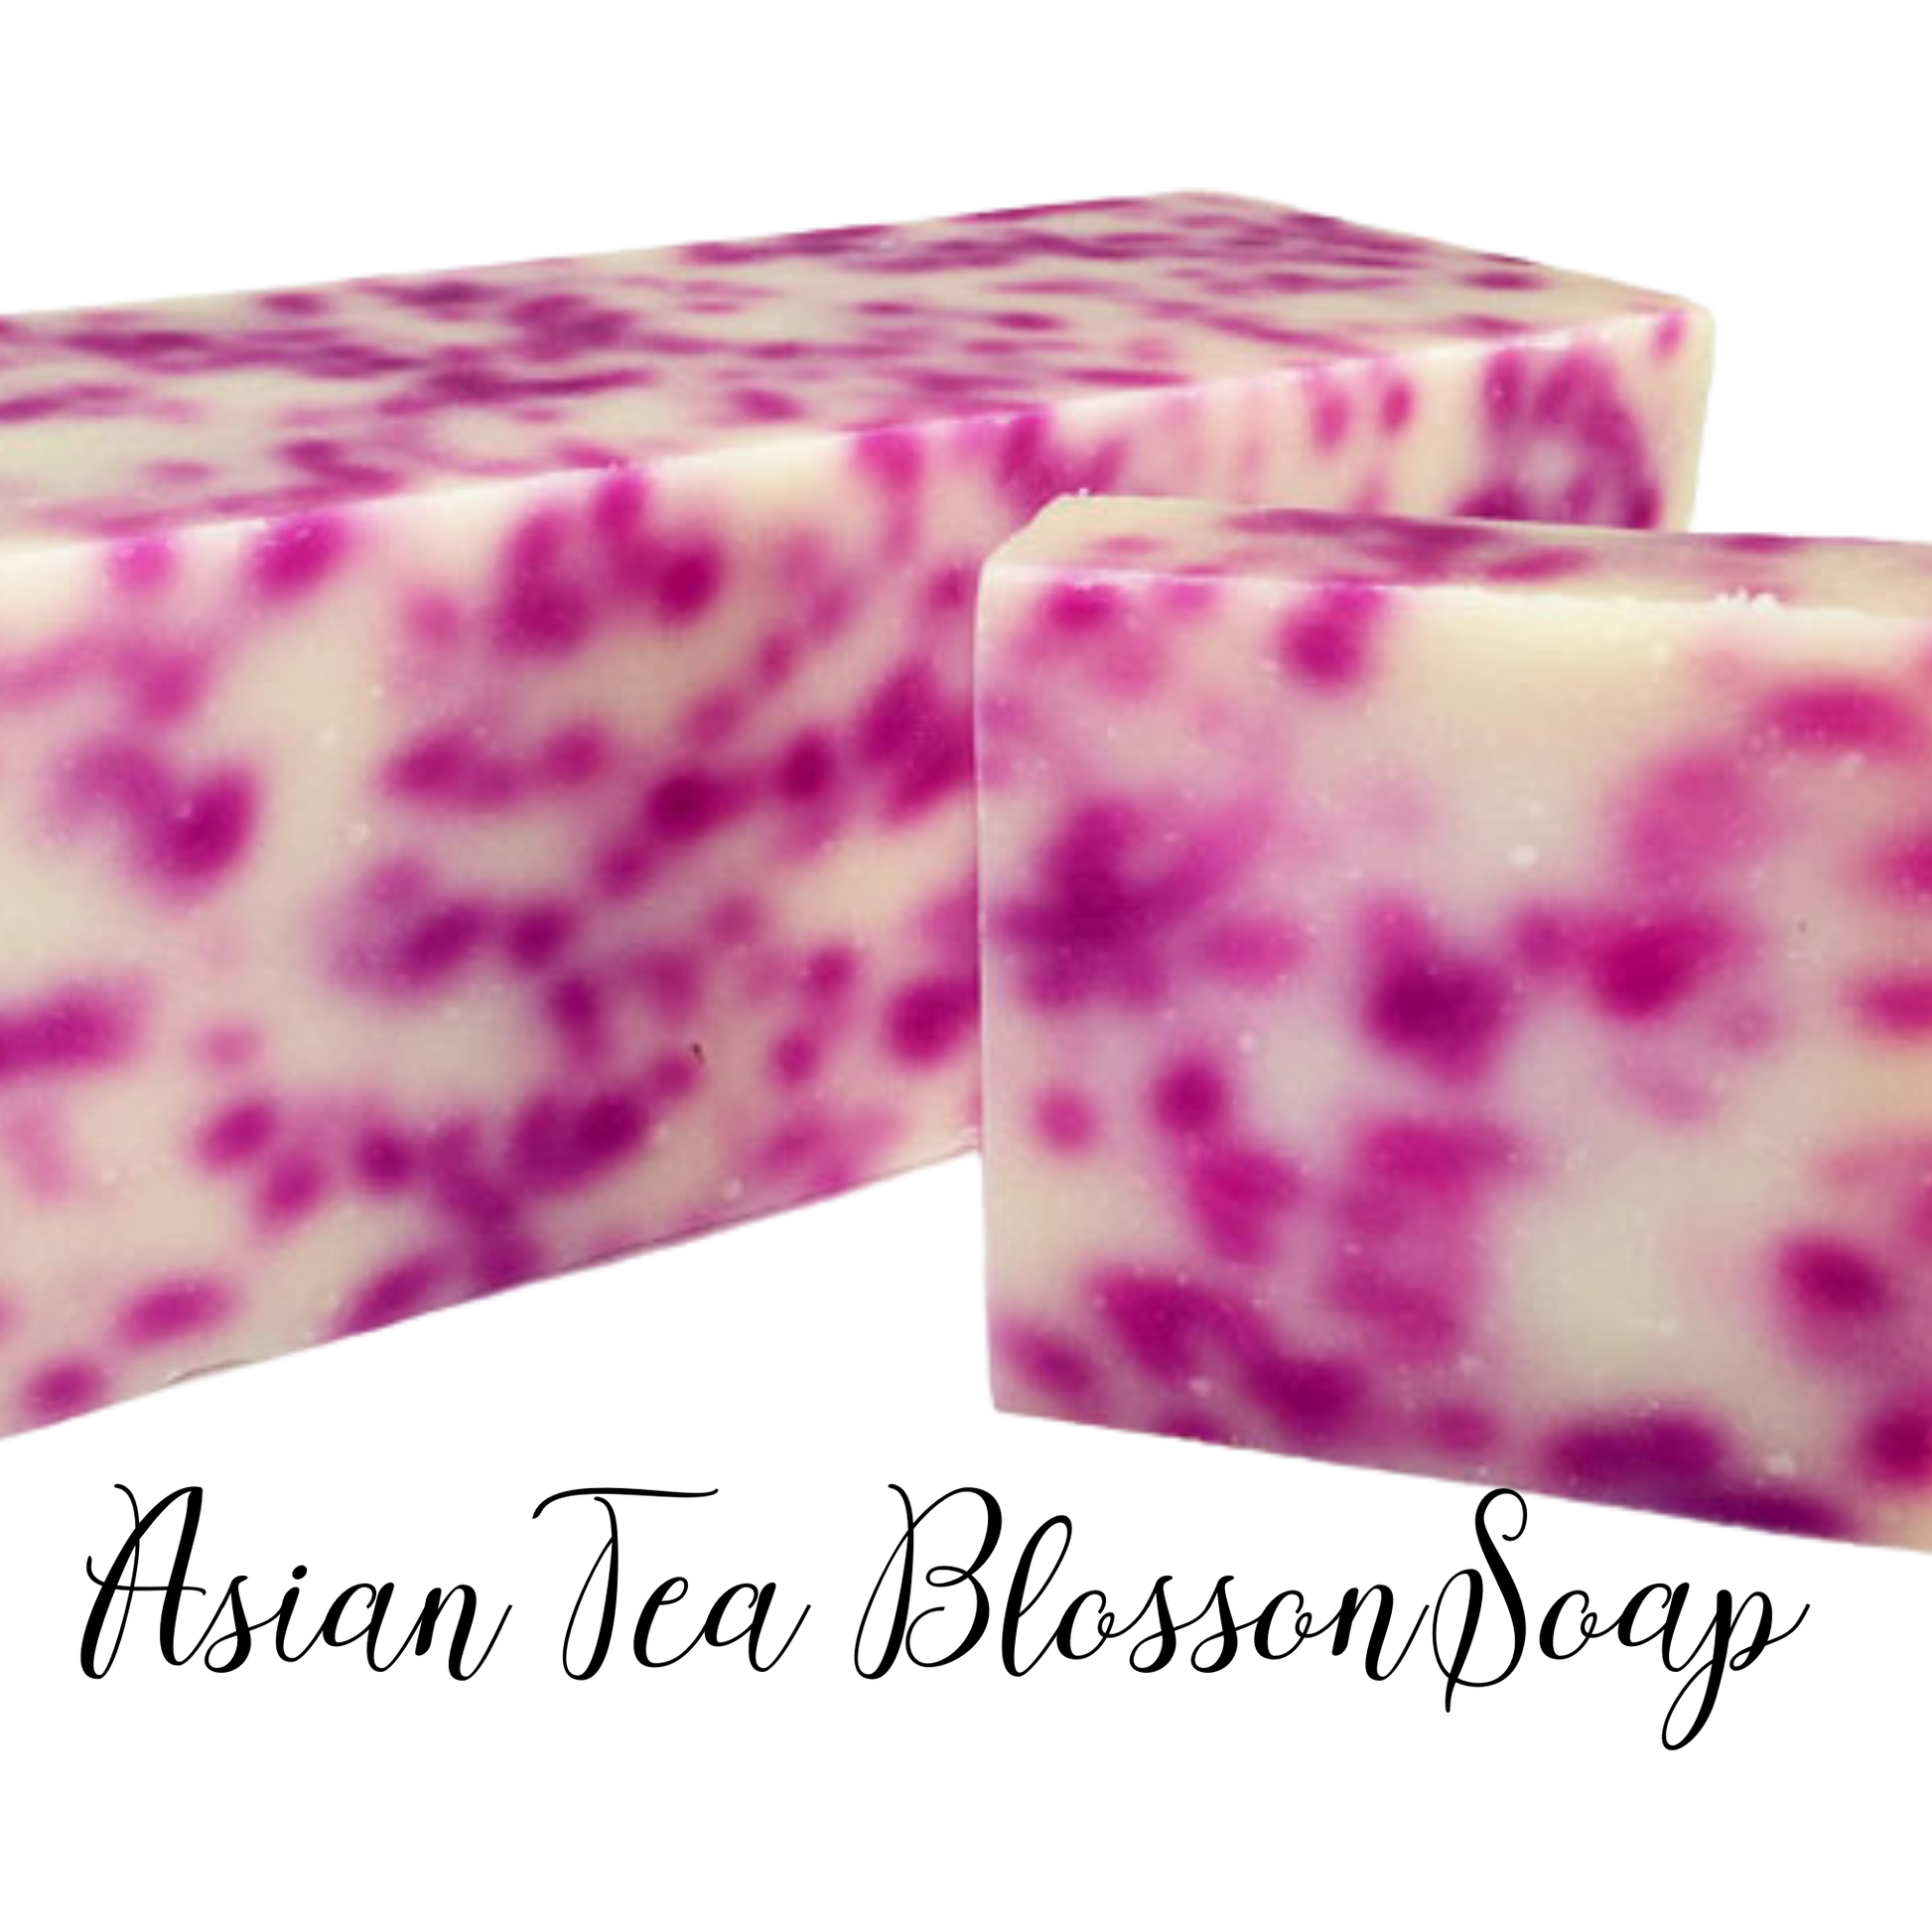  Sweet tea and herbs with light notes of berries and other fruits. Very unique fragrance. 5.5 oz bar soap